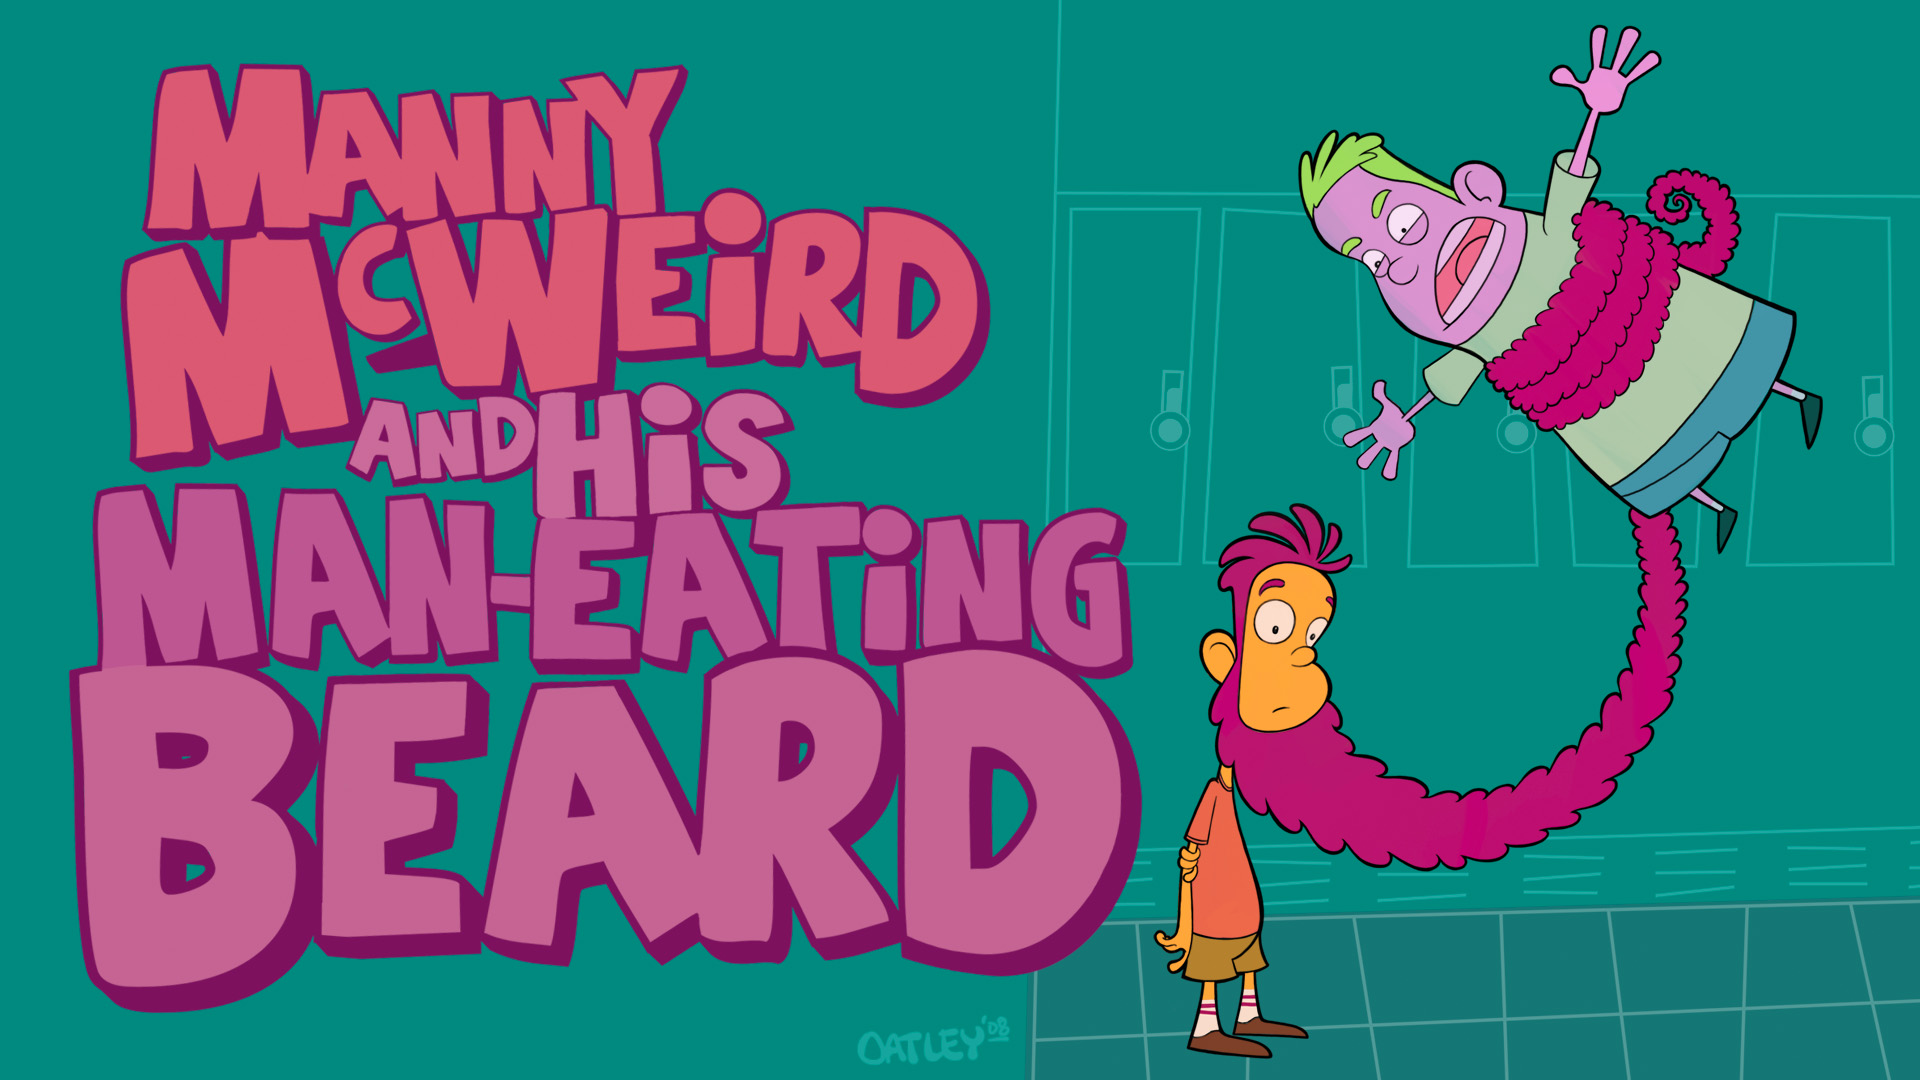 A digital cover illustration by Chris Oatley for a TV Pitch called ‘Manny McWeird And His Man-Eating Beard.’ It shows Manny with his extremely long beard wrapped around another character, holding him up in the air above Manny’s head.